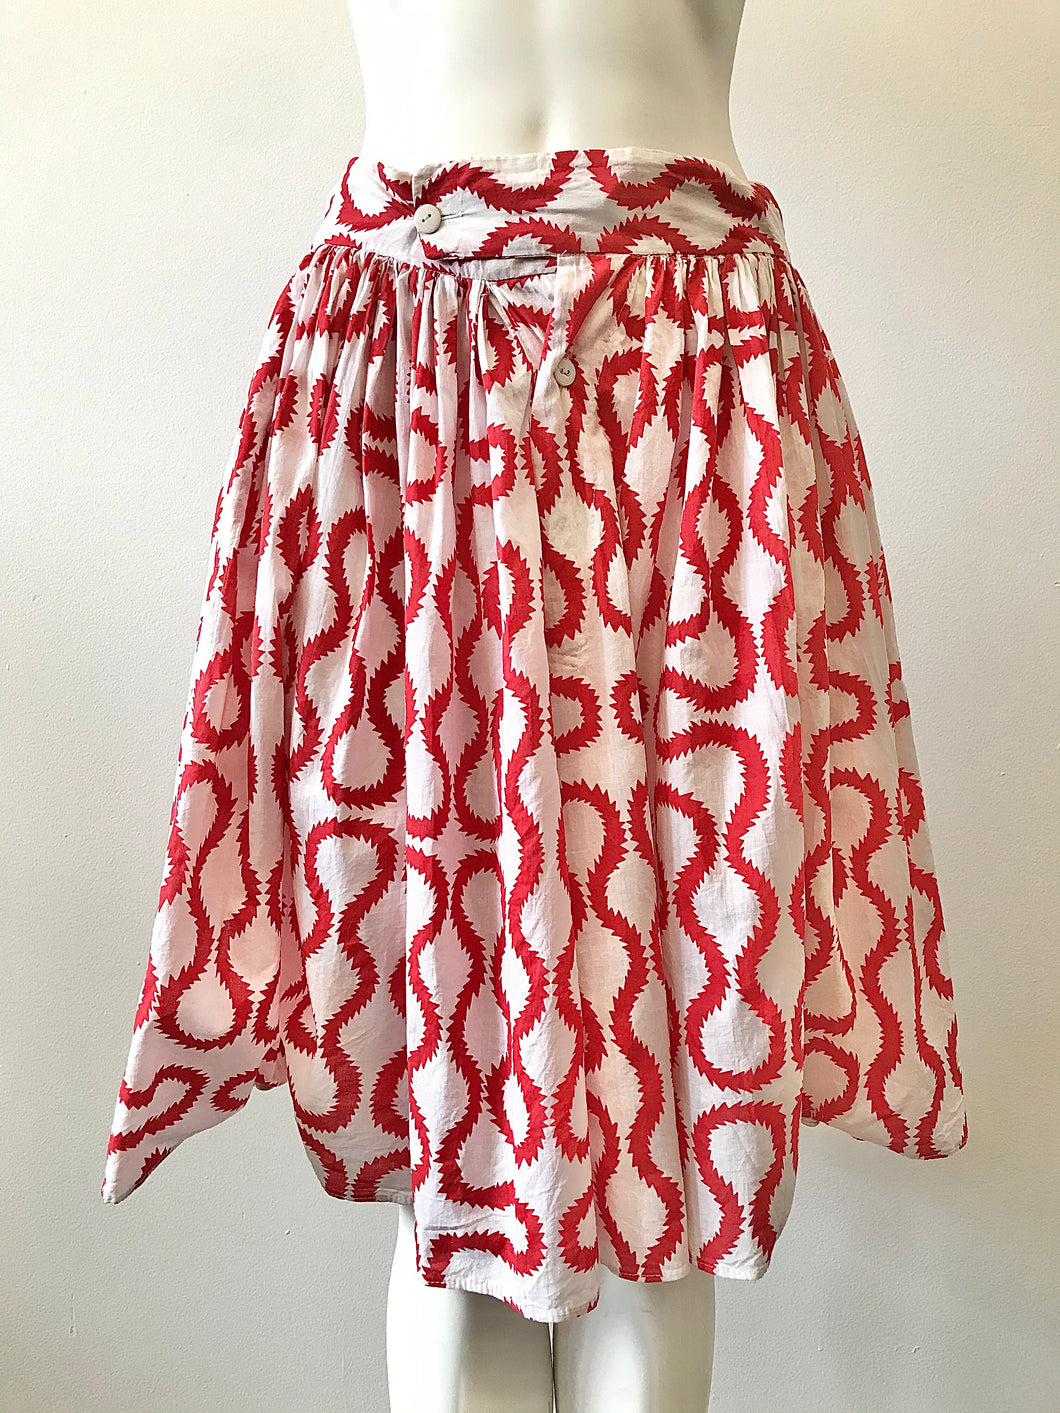 1981 Red Squiggle Bloomers by World's End Vivienne Westwood & Malcom McLaren